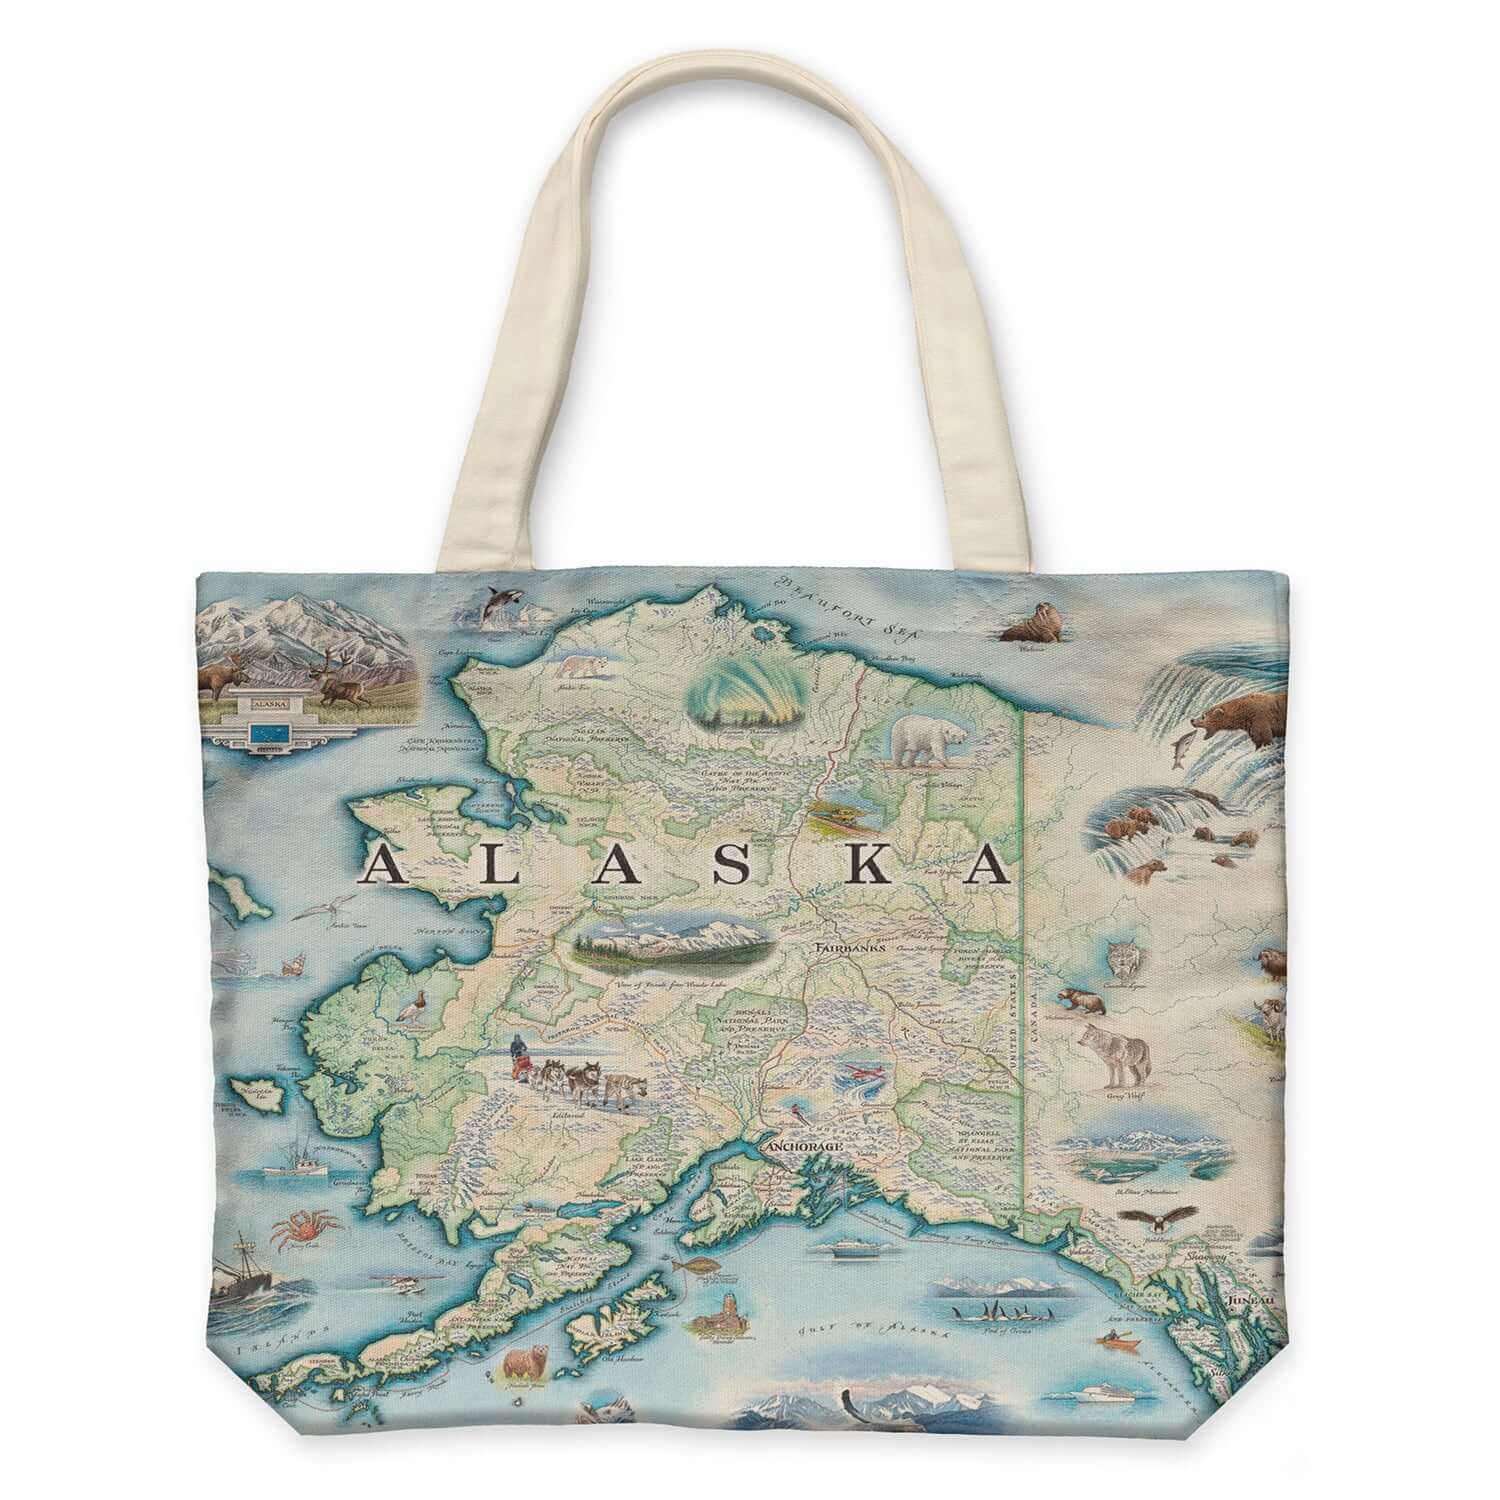 Alaska State map canvas tote bag in earth tone colors - featuring Anchorage, Juneau, Fair Banks, Denali National Park, Iditarod Trail Sled Dog Race, bears, elk, moose, whales, a mountain goat & a sheep. 